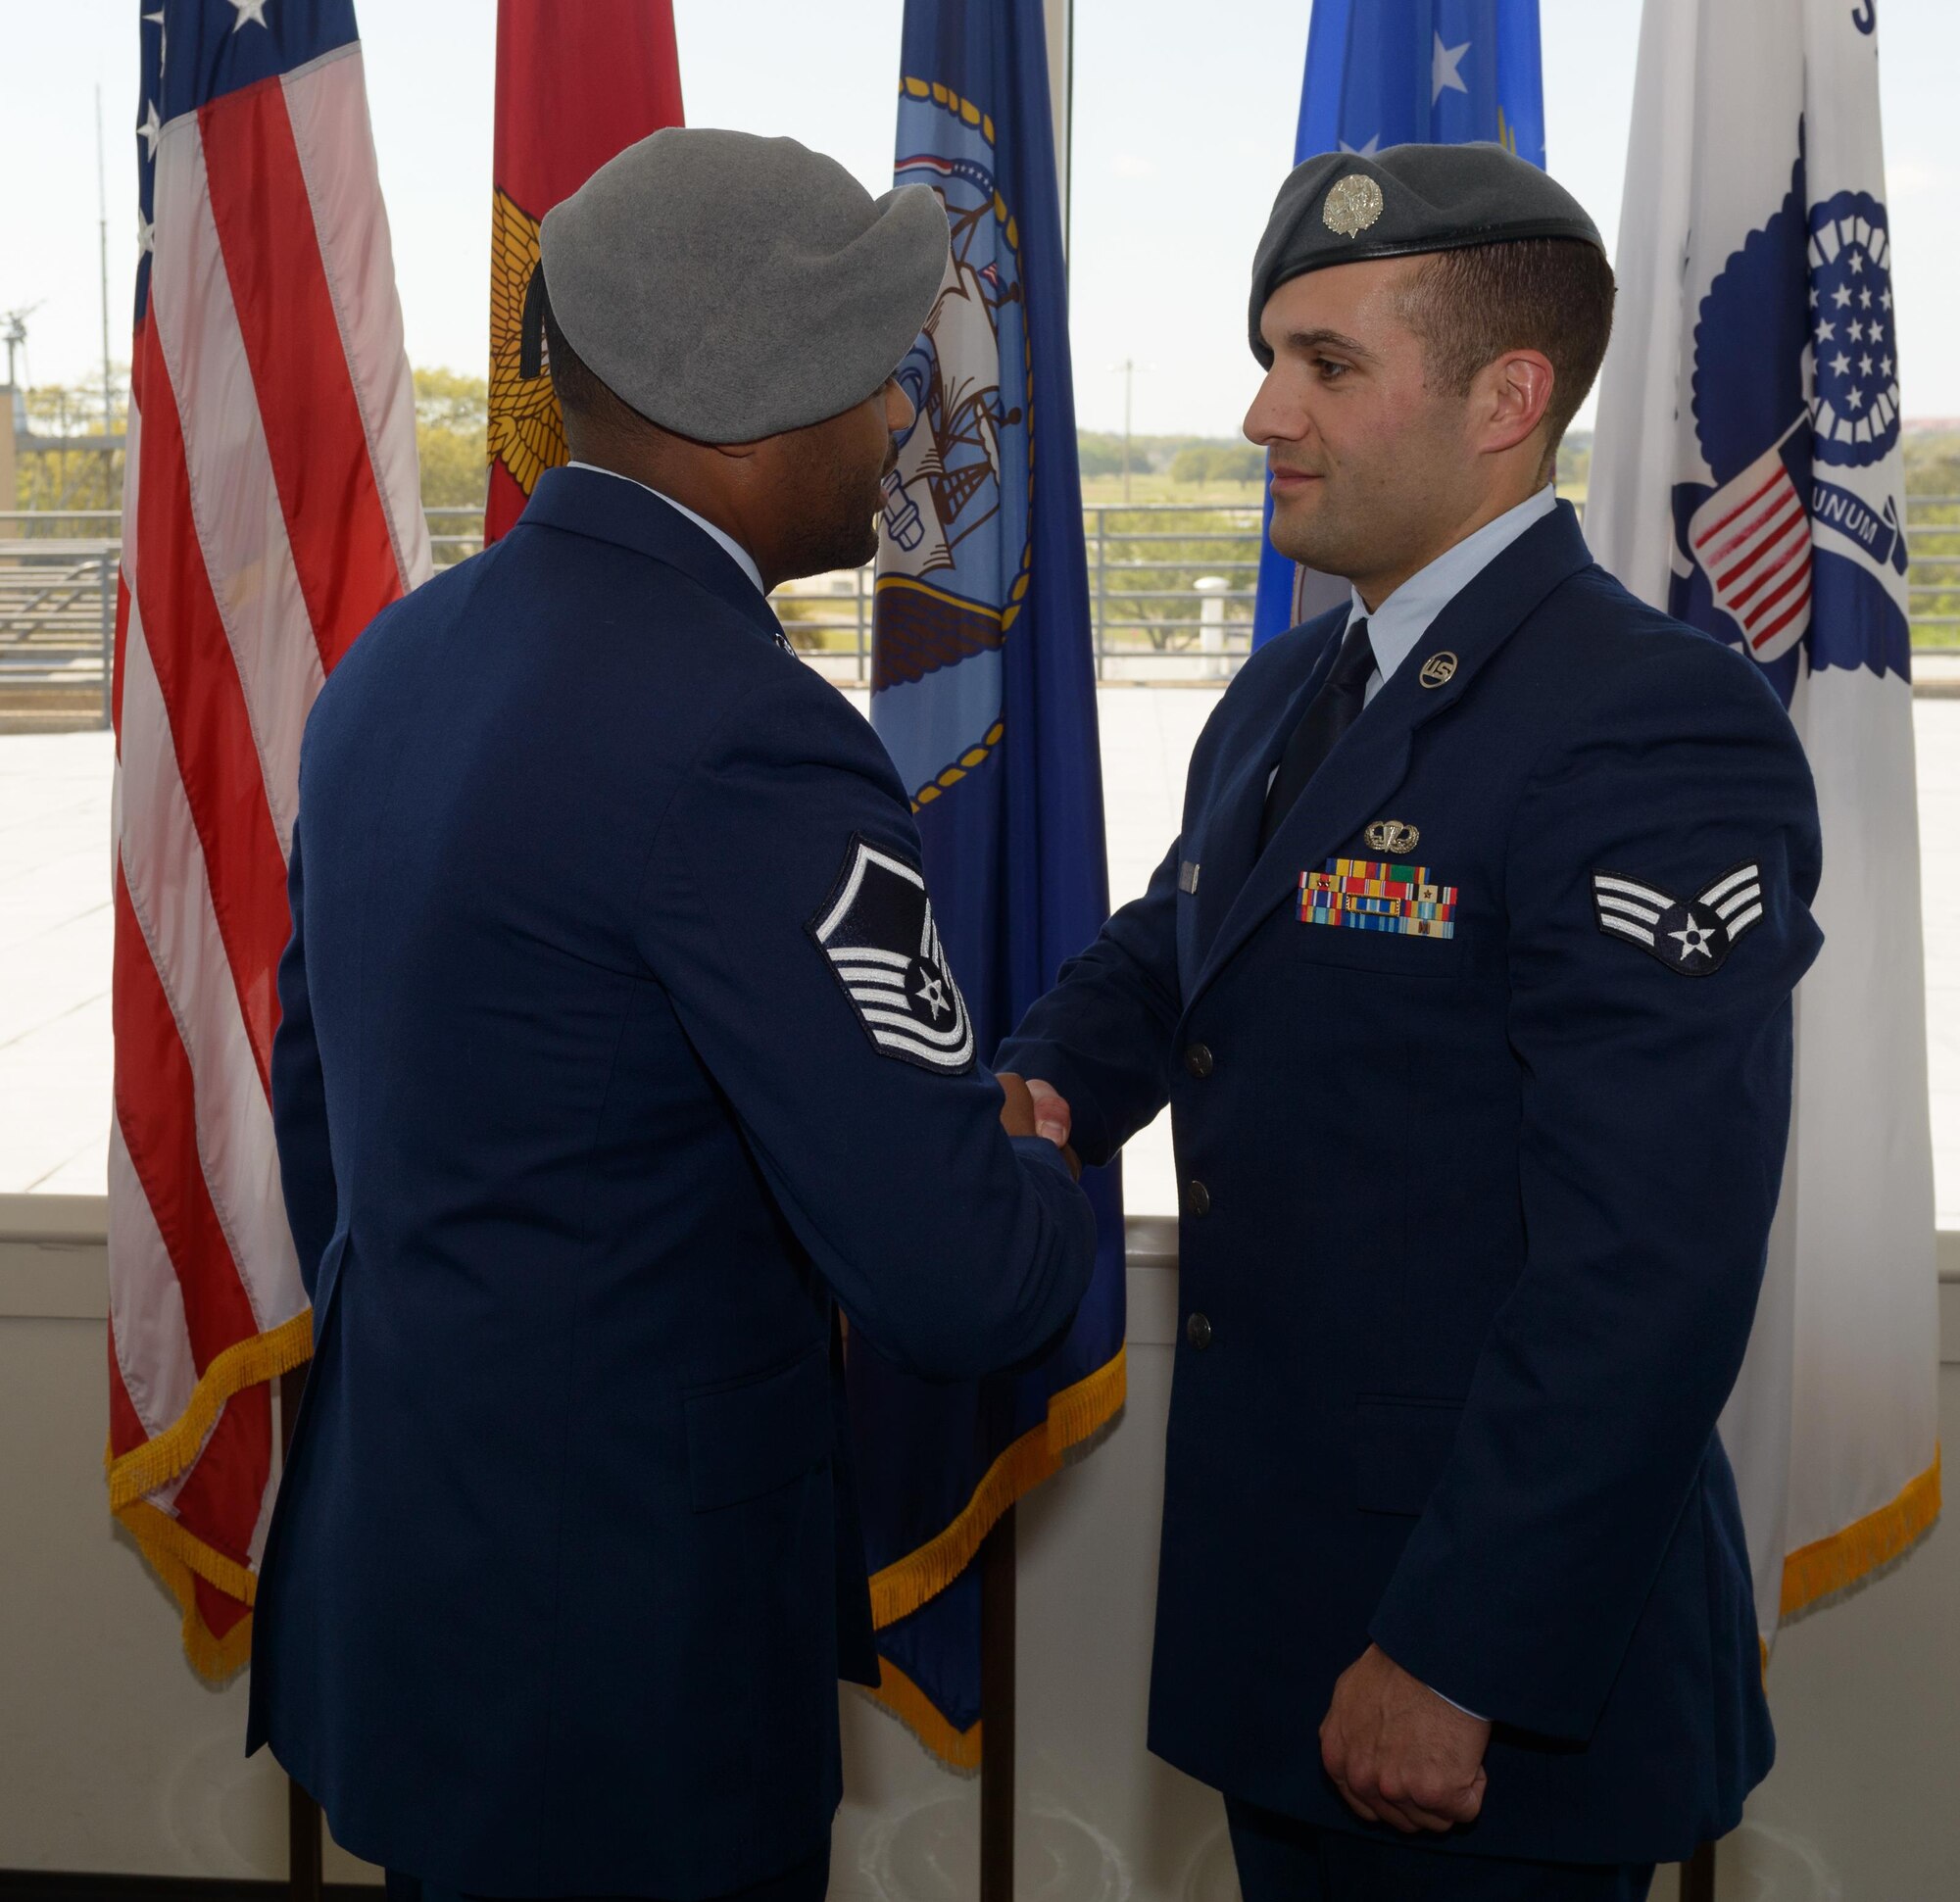 A Battlefield Airman congratulates Senior Airman Matthew James, 335th Training Squadron student, on graduating from the Special Operations Weather Apprentice Course at the Weather Training Complex, March 22, 2017, on Keesler Air Force Base, Miss. At his graduation James received his Gray Beret. (U.S. Air Force photo by Andre’ Askew)